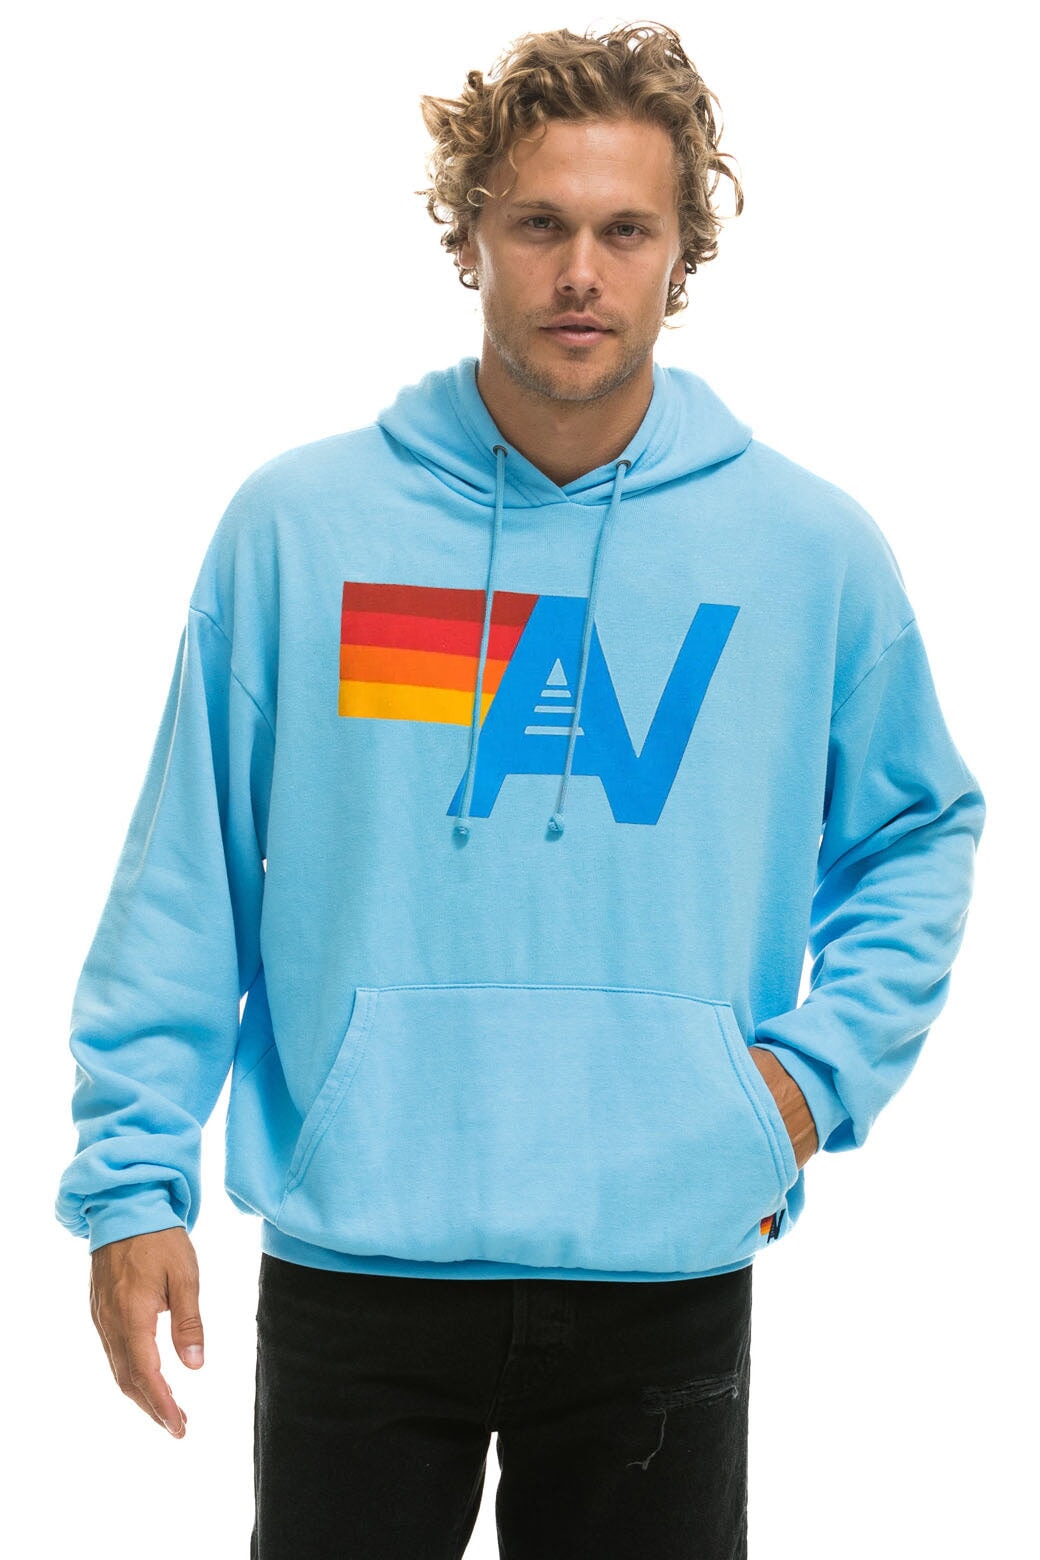 AVIATOR NATION MIAMI RELAXED PULLOVER HOODIE - WHITE